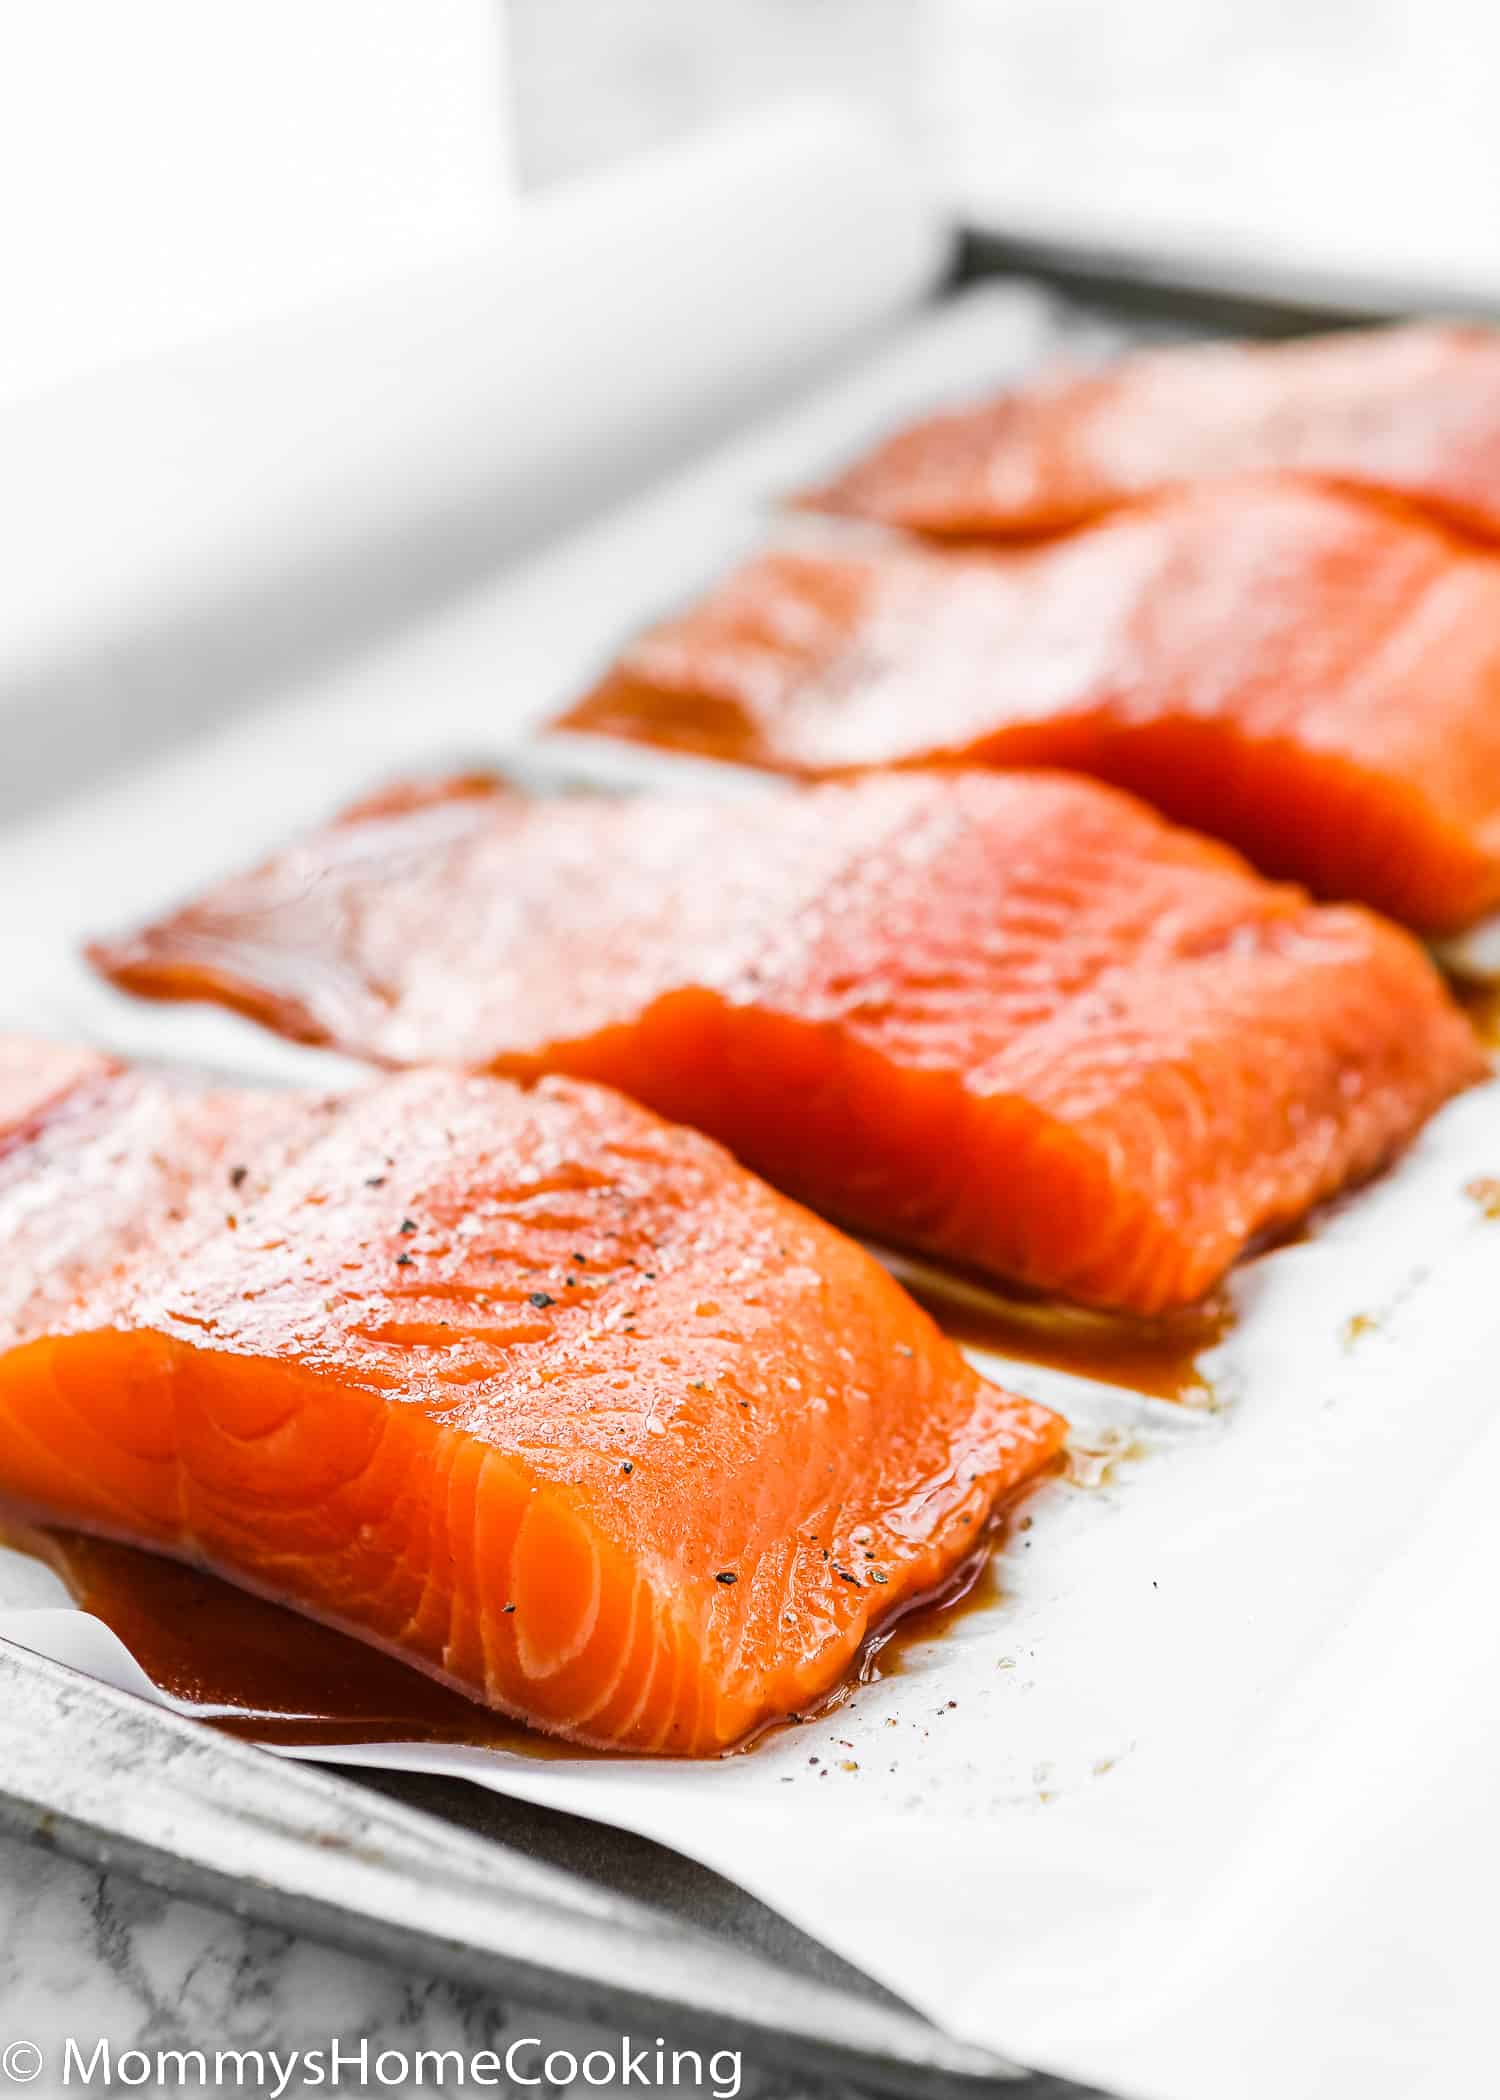 Uncooked salmon fillets over a baking sheet.